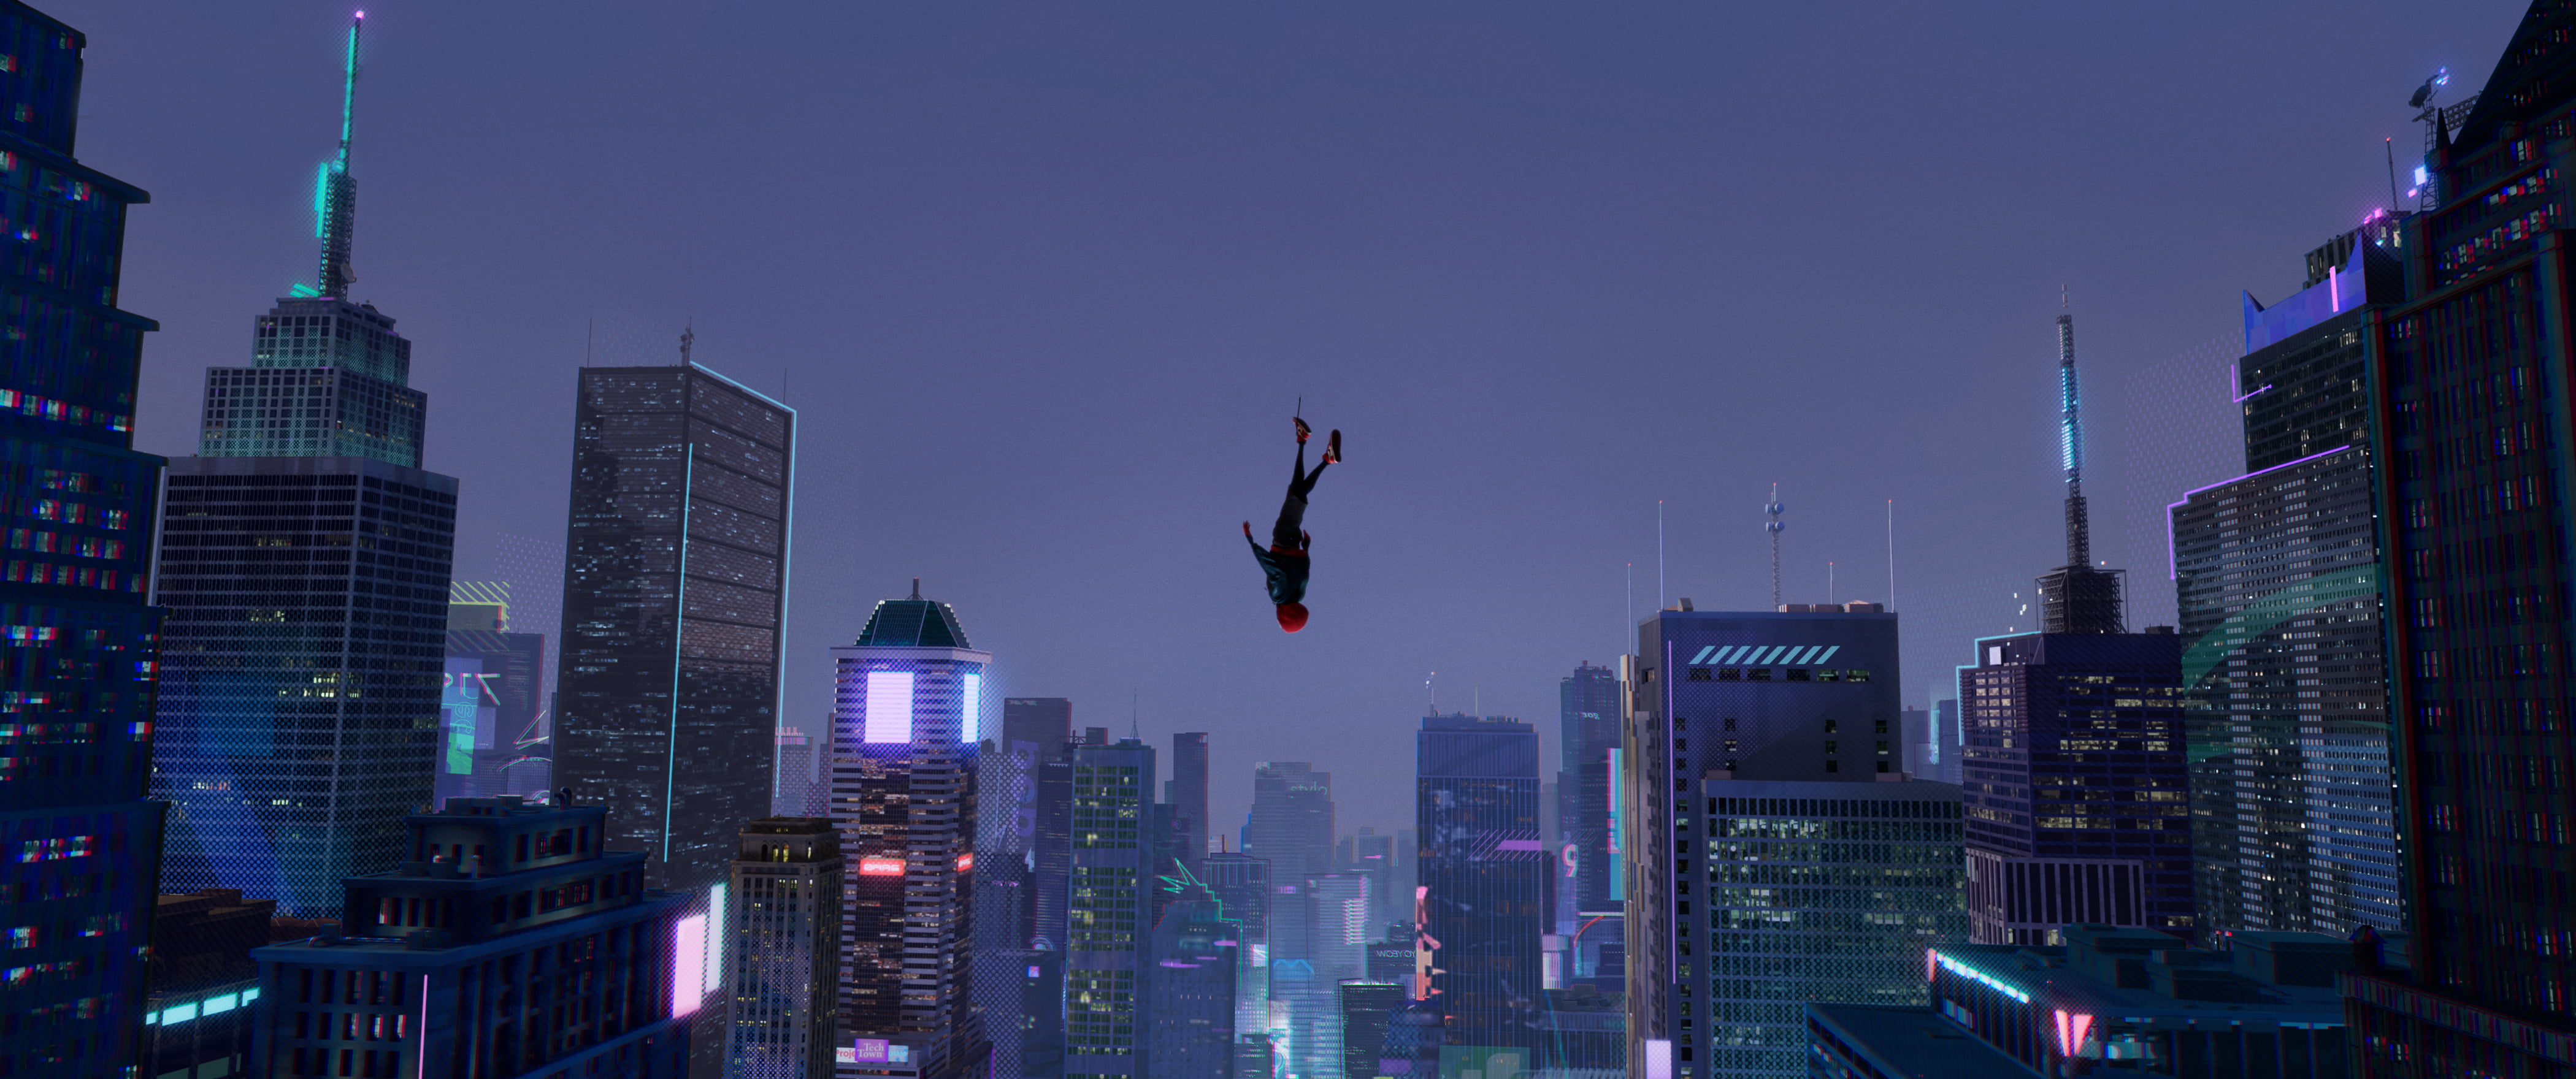 Cool Miles Morales into the Spider Verse, sky, spiderman, building exterior, tall  high